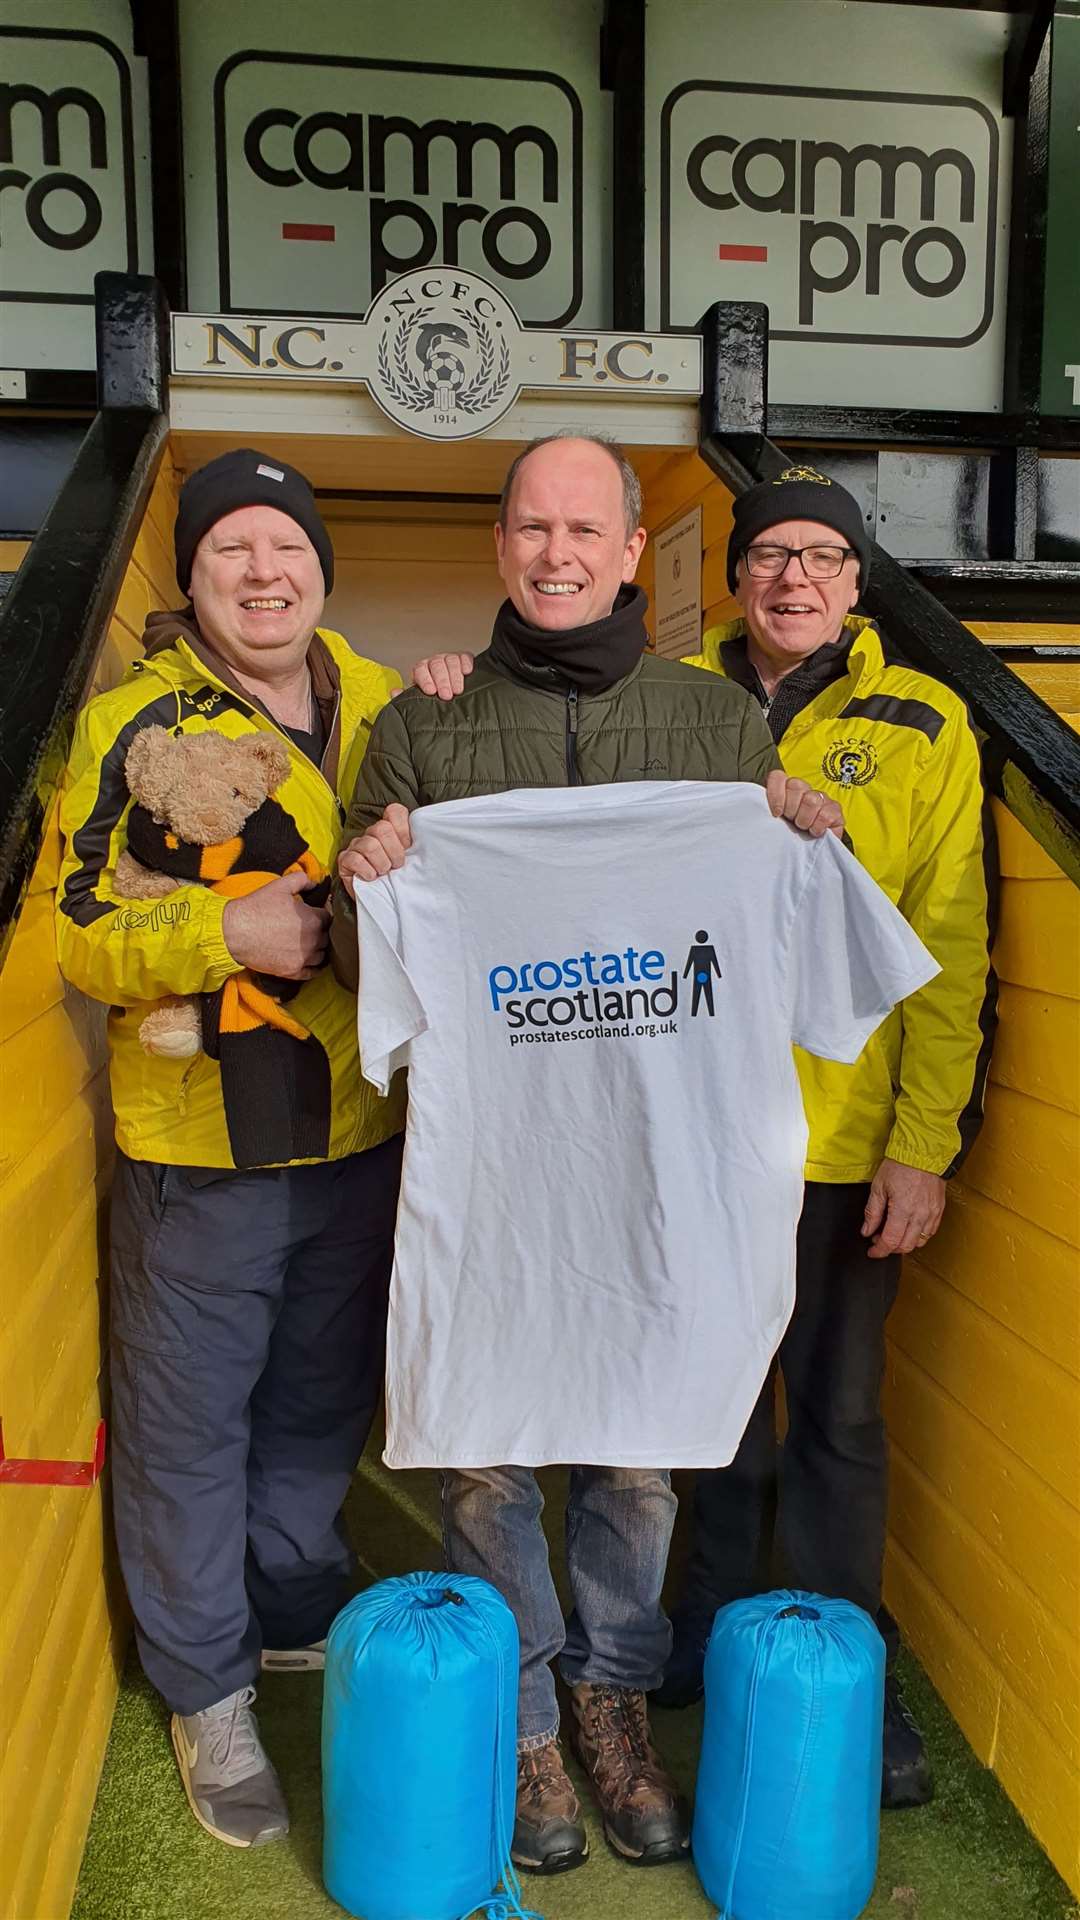 Donald Graham (centre) who underwent surgery for prostate cancer and Nairn County pals Ian Finlayson, Secretary (left) and chairman Donald Matheson slept out in the stand at Station Park to raise funds for Raigmore Hospital and Prostrate Scotland.